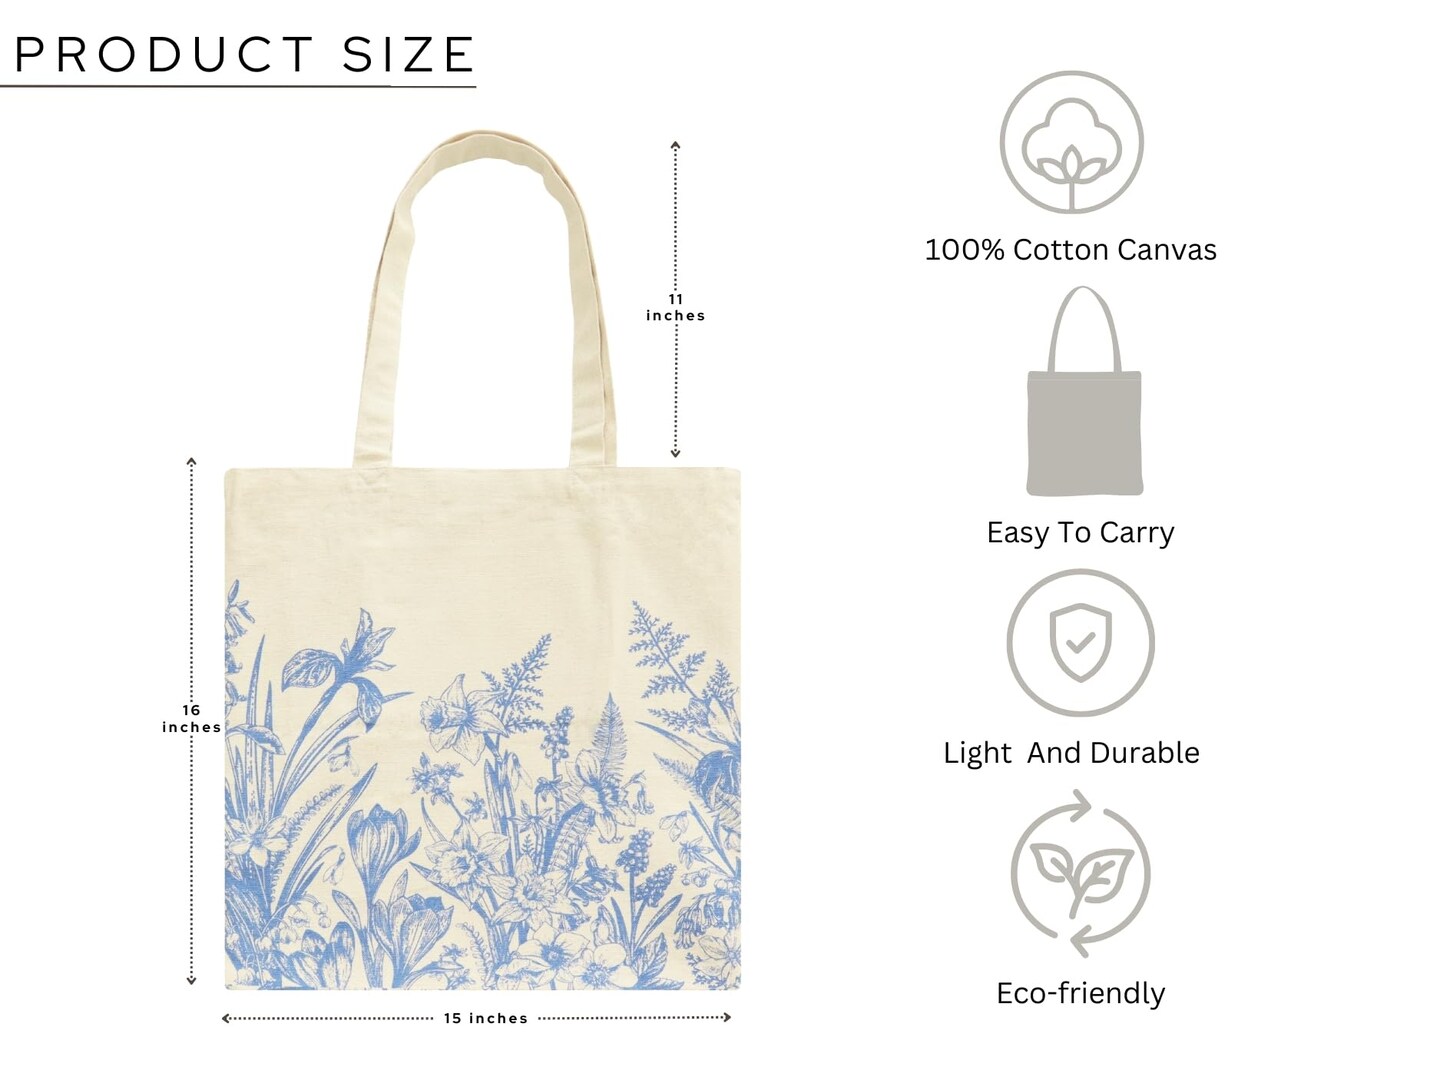 PurpleEssences Floral Tote Bag for Women, Cute Aesthetic Spring Tote Bag with Inner Pocket, Reusable Cloth Cotton Flower Tote Bag for Daily Essentials - Floral